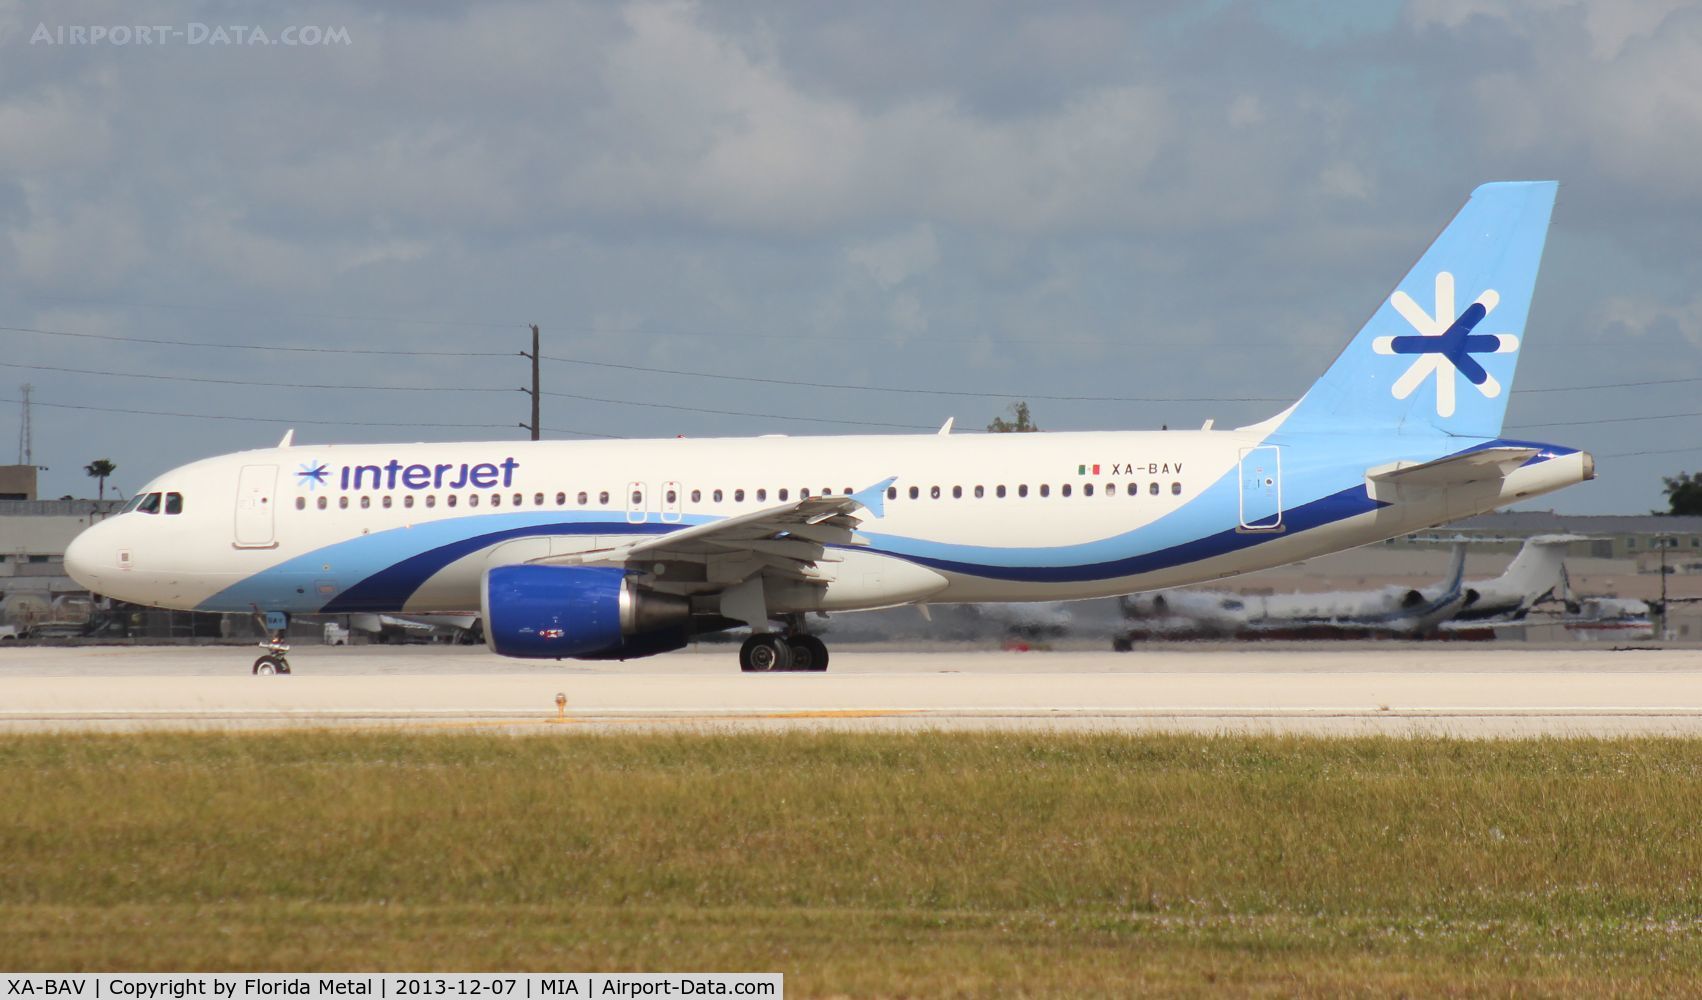 XA-BAV, 2012 Airbus A320-214 C/N 5372, Interjet Mexico A320 new to database